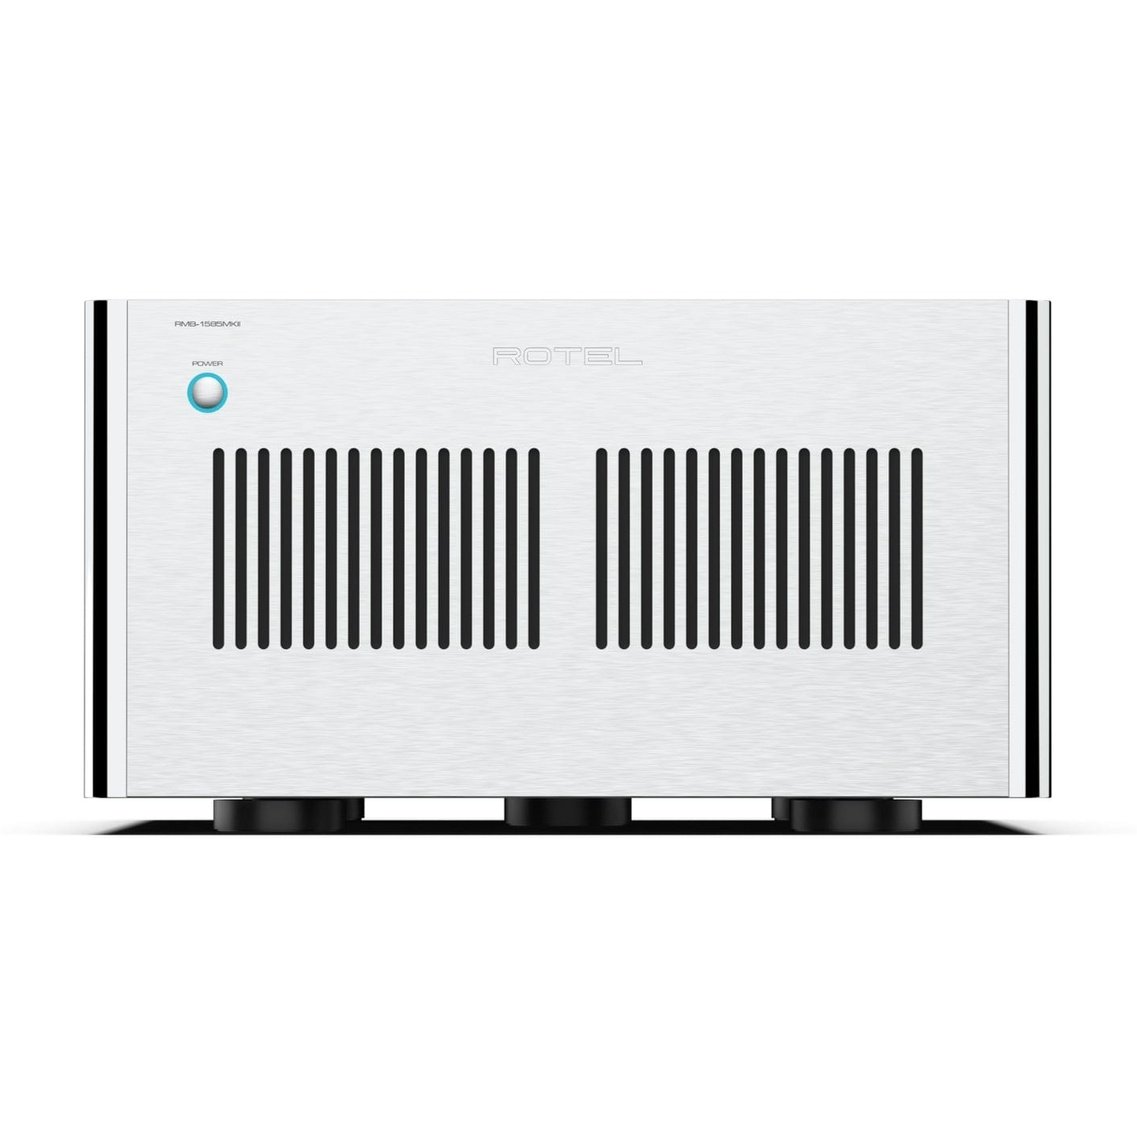 Rotel Rotel RMB-1585MKII 5ch Power Amplifier - Pre-Order Power Amplifiers